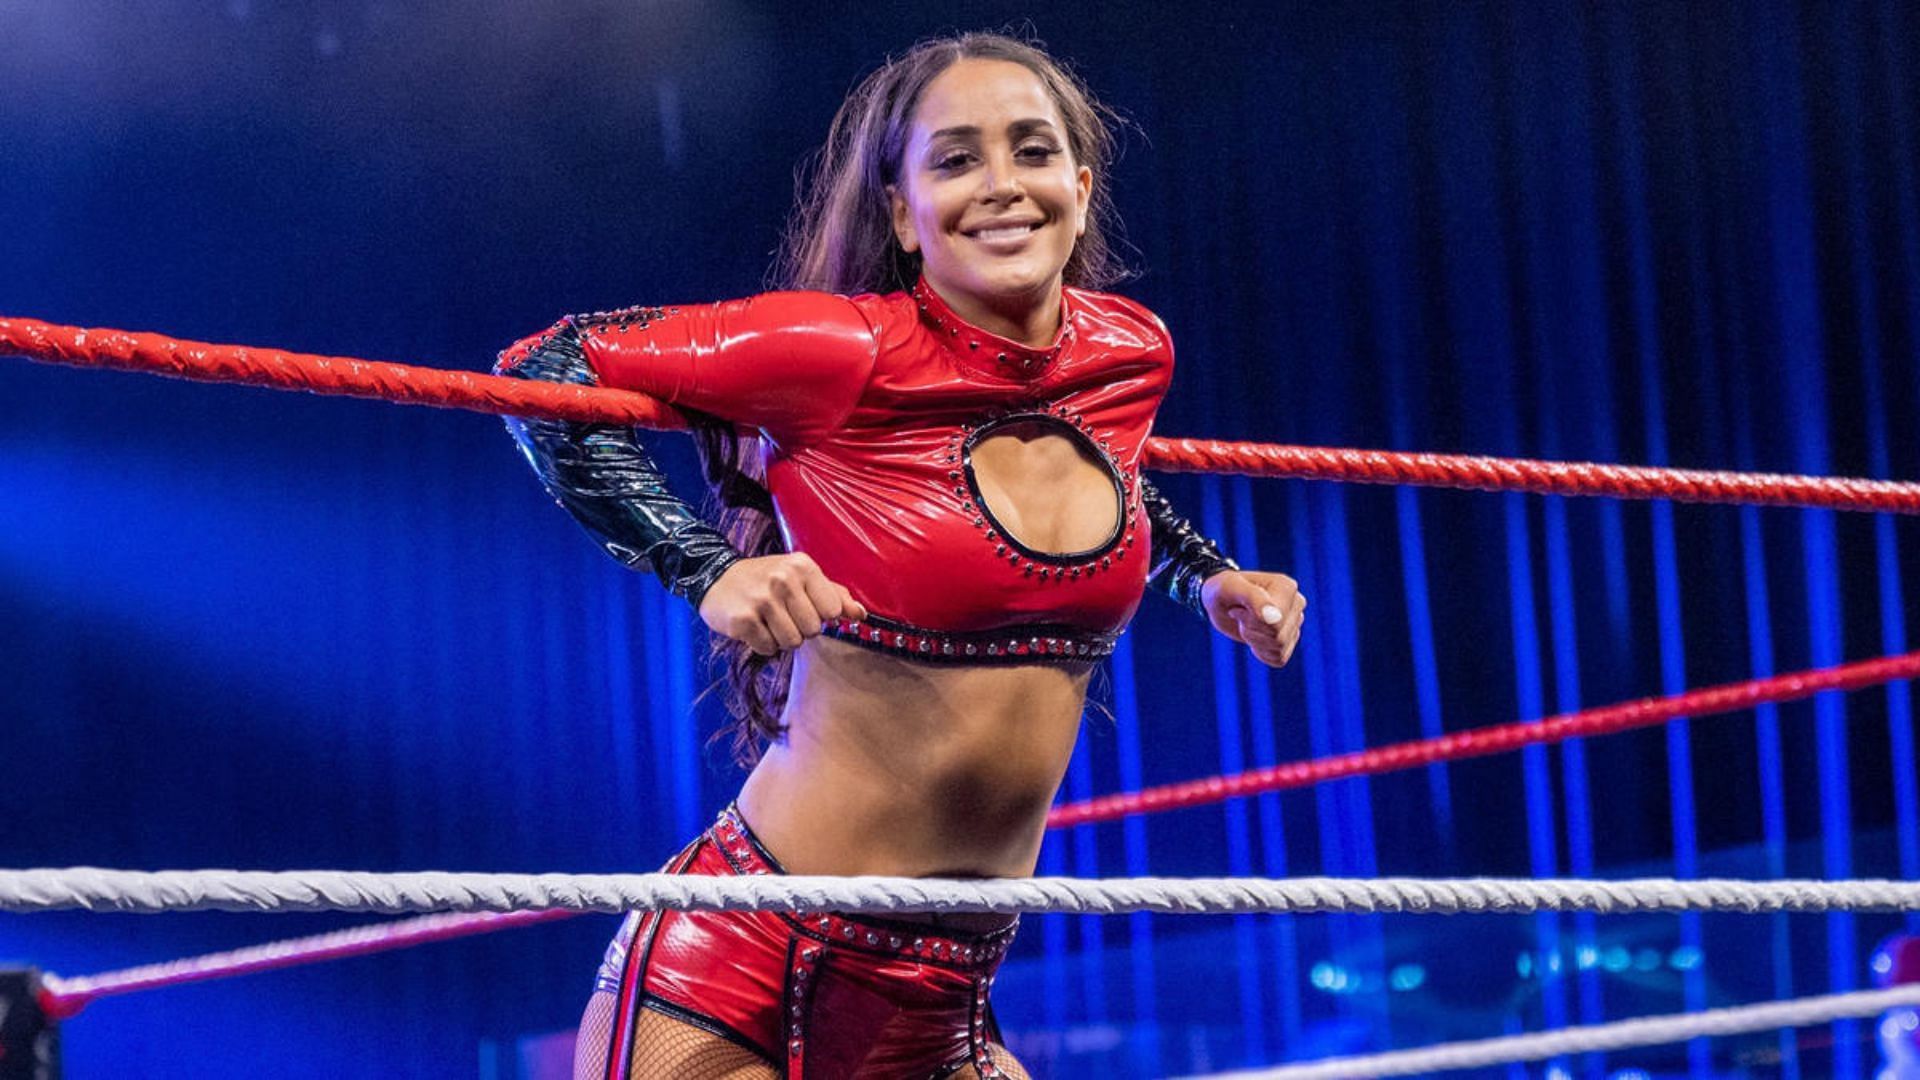 Aliyah currently is a member of the SmackDown roster